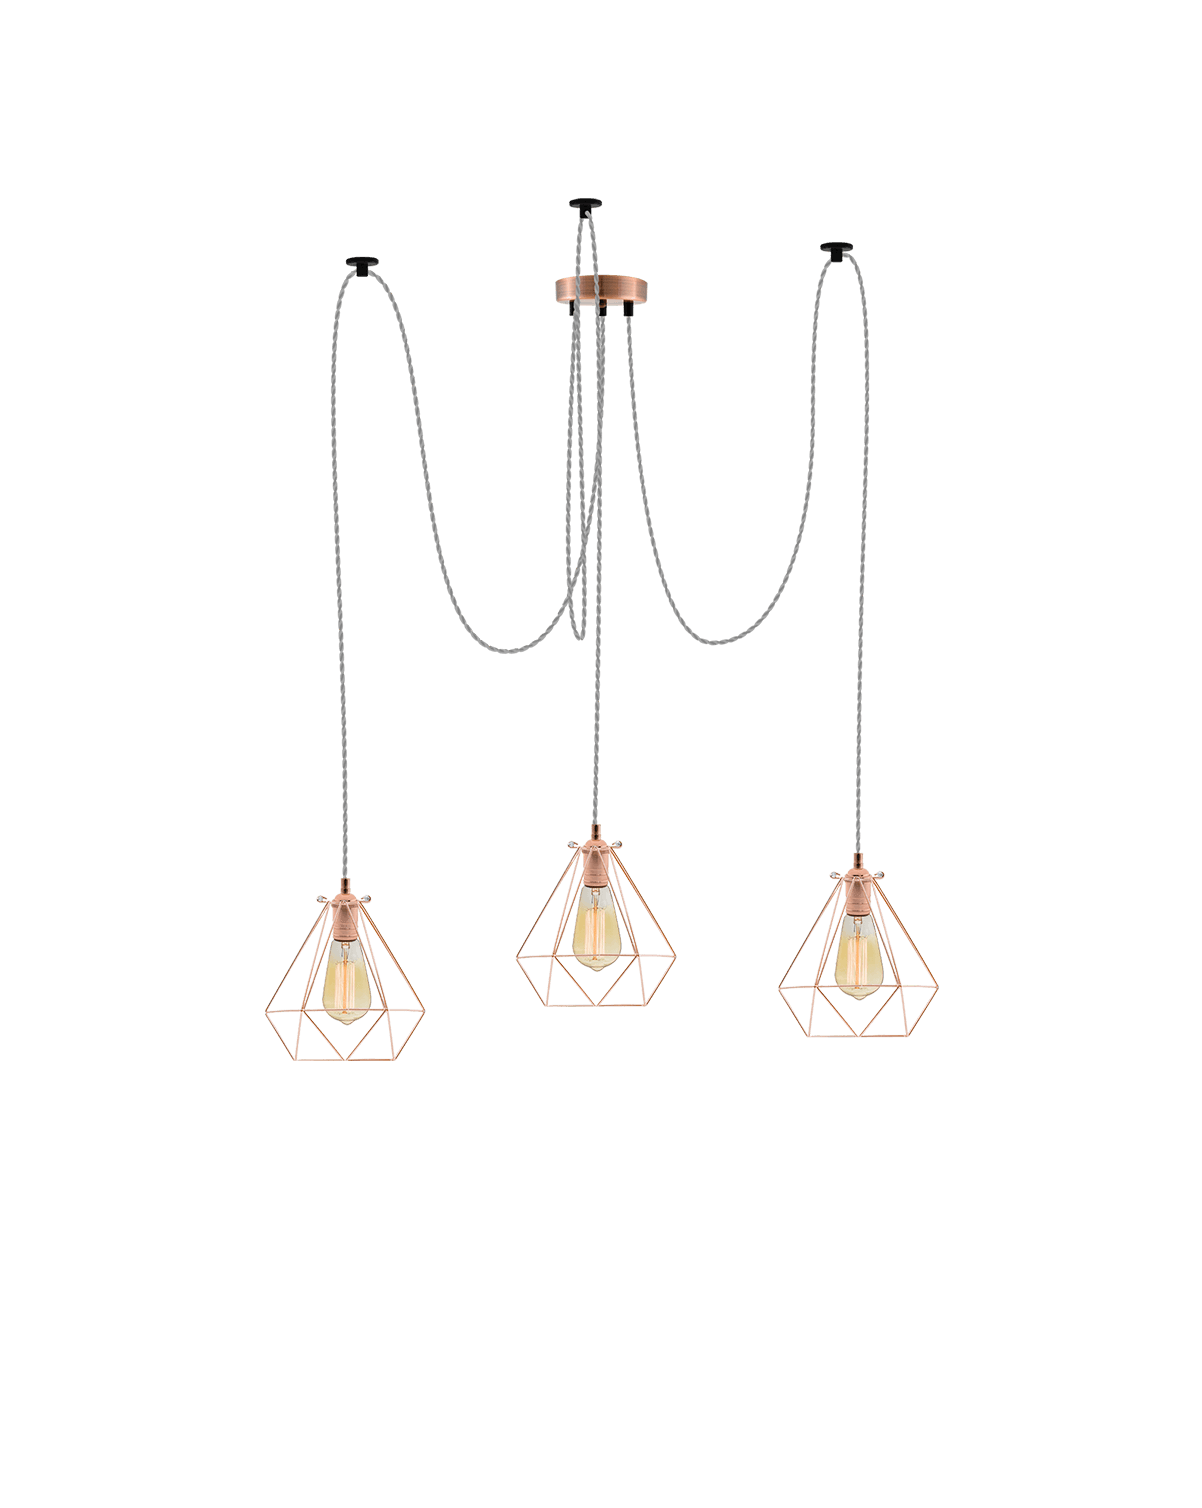 Swag Chandelier: Grey and Copper Diamond Cages Hangout Lighting 3 Swag